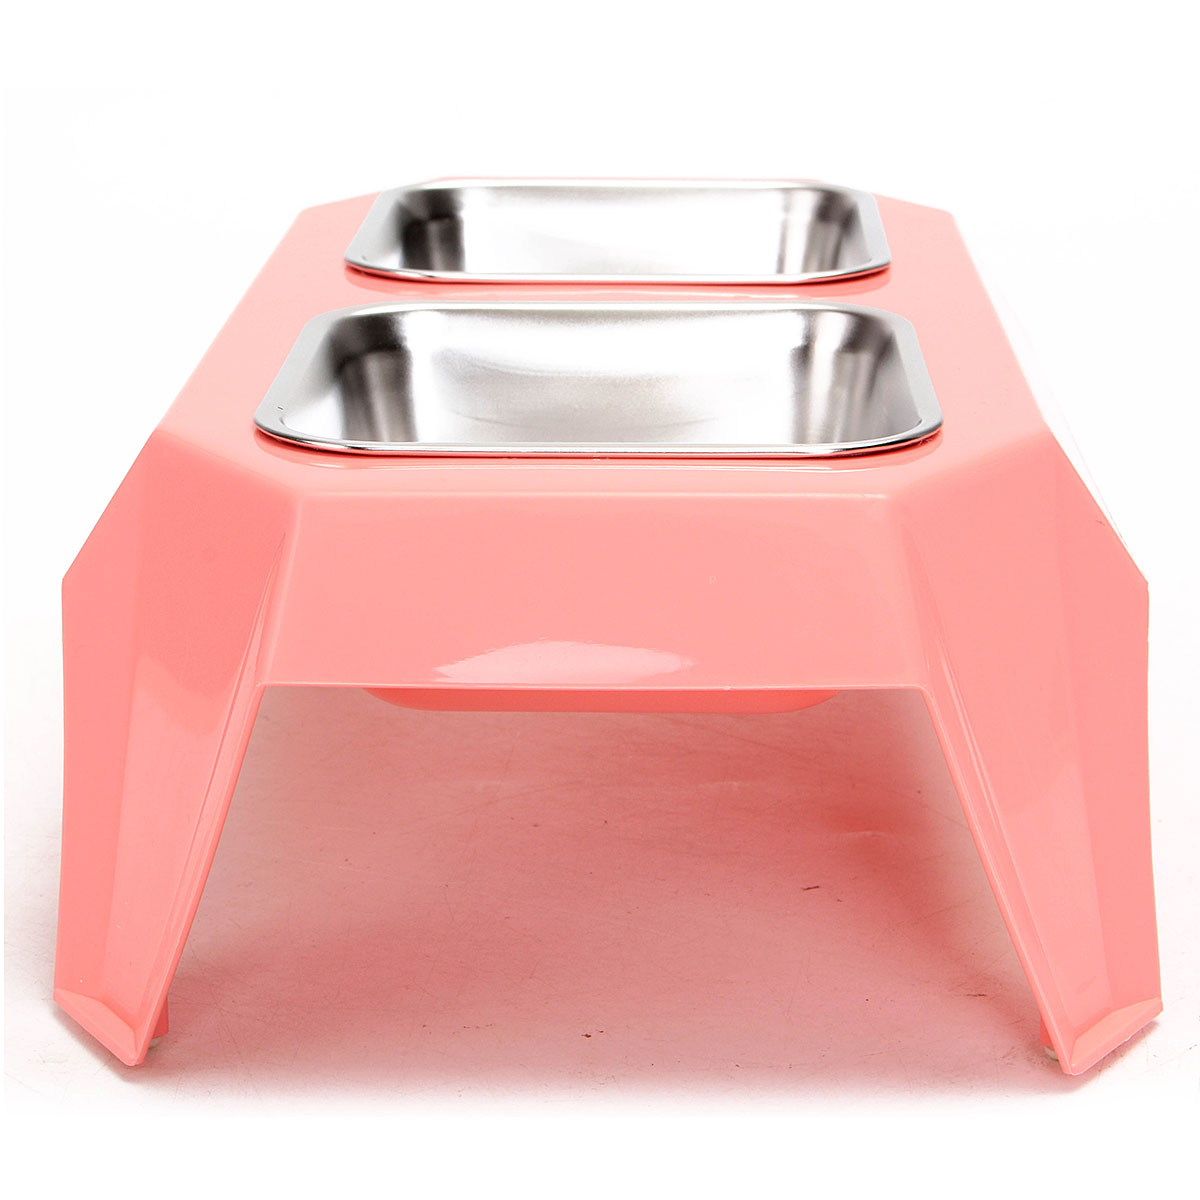 Pet Double Food Bowl Water Feeder Food Dispenser Removable  Stainless Steel Bowl Double Bowls  with Non-Slip Stand Holder for Big Dog Cat - image 3 of 7